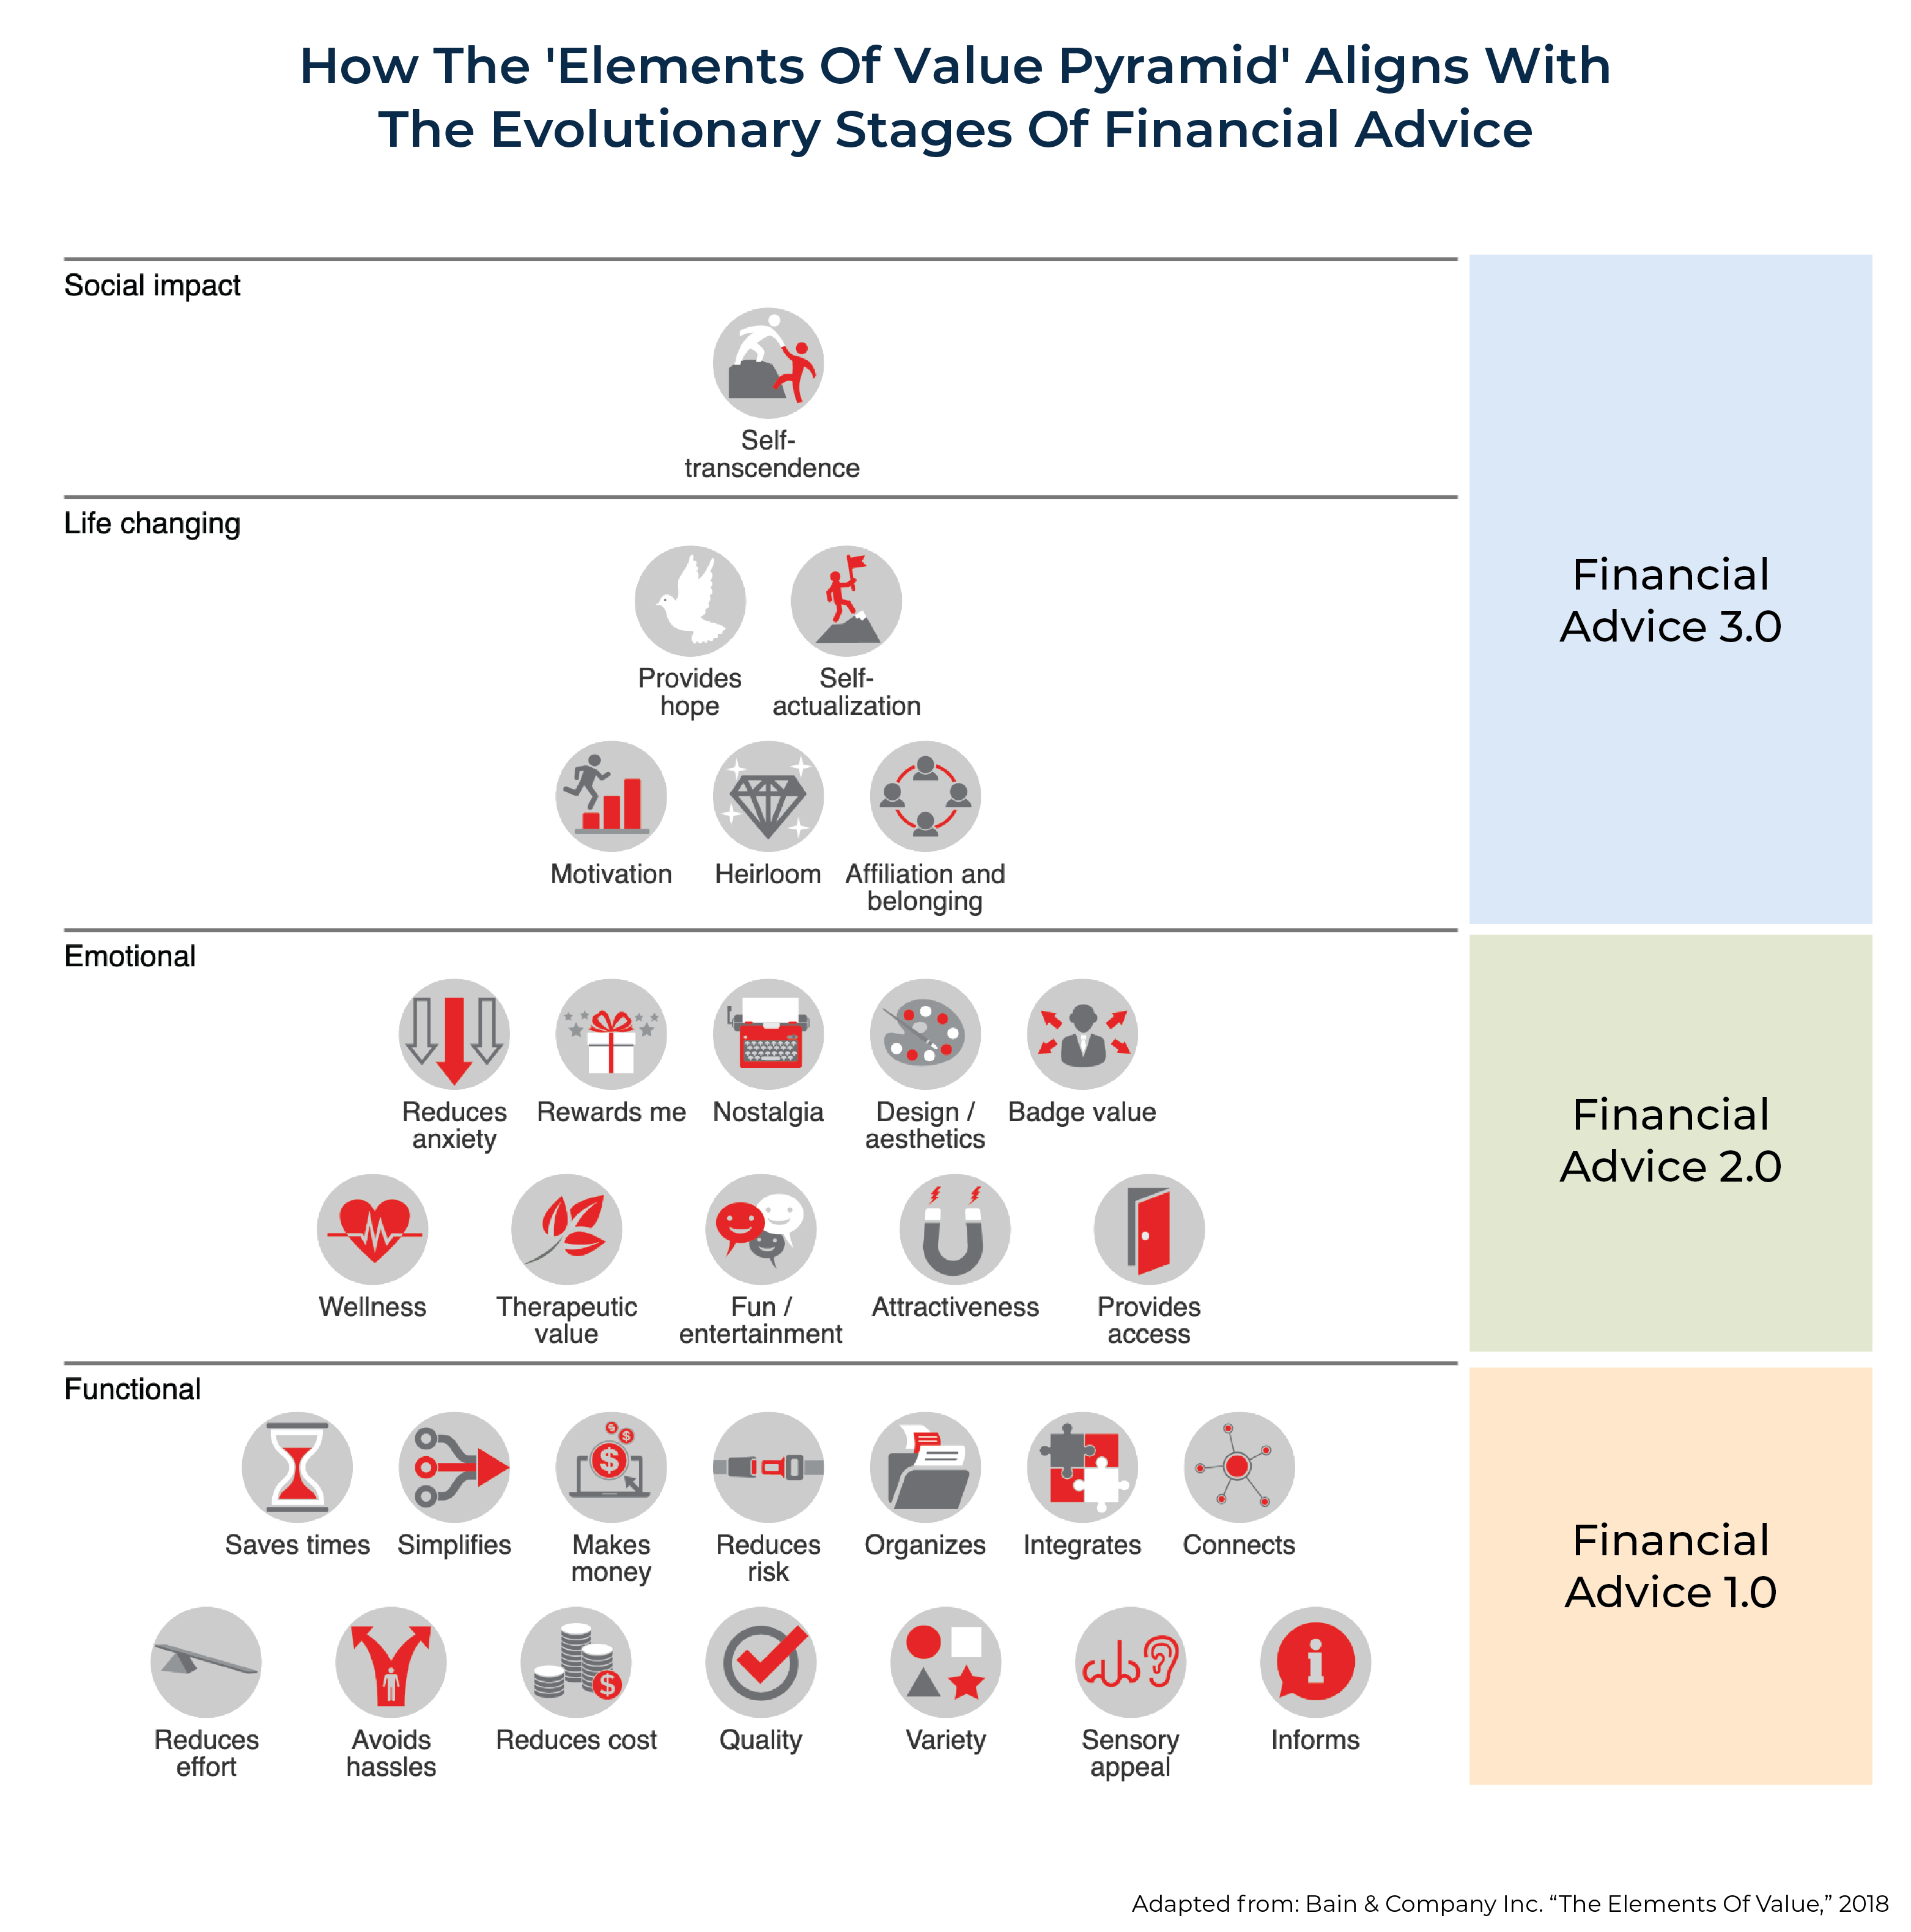 How The Elements Of Value Pyramid Aligns With The Evolutionary Stages Of Financial Advice: Future Of Financial Advice 